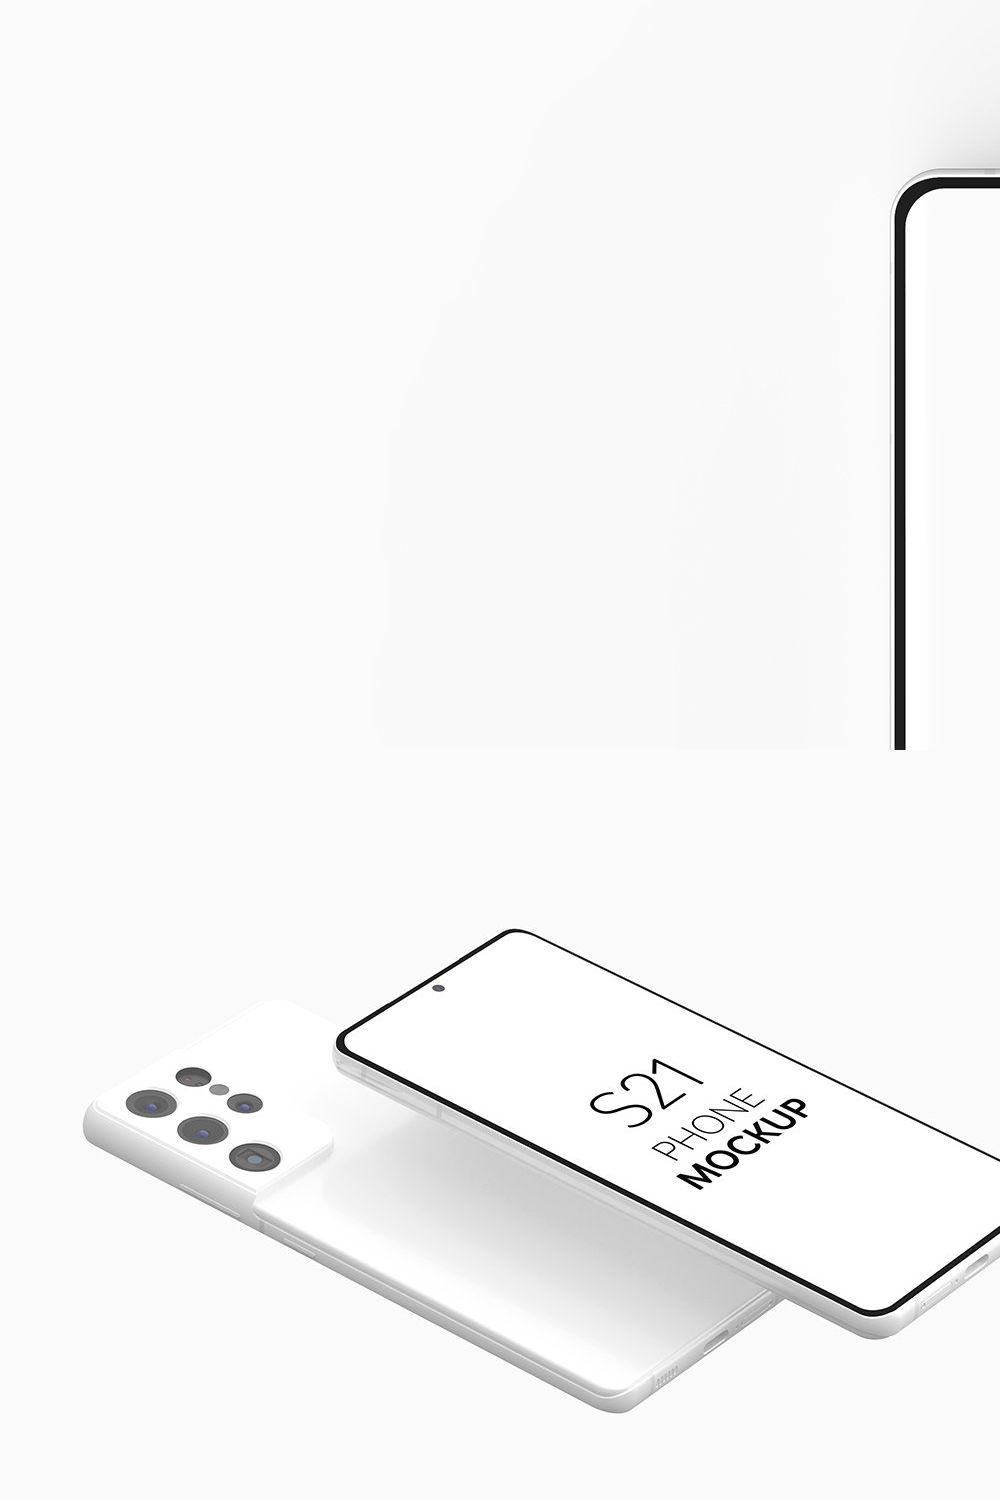 S21 Phone Mockup pinterest preview image.